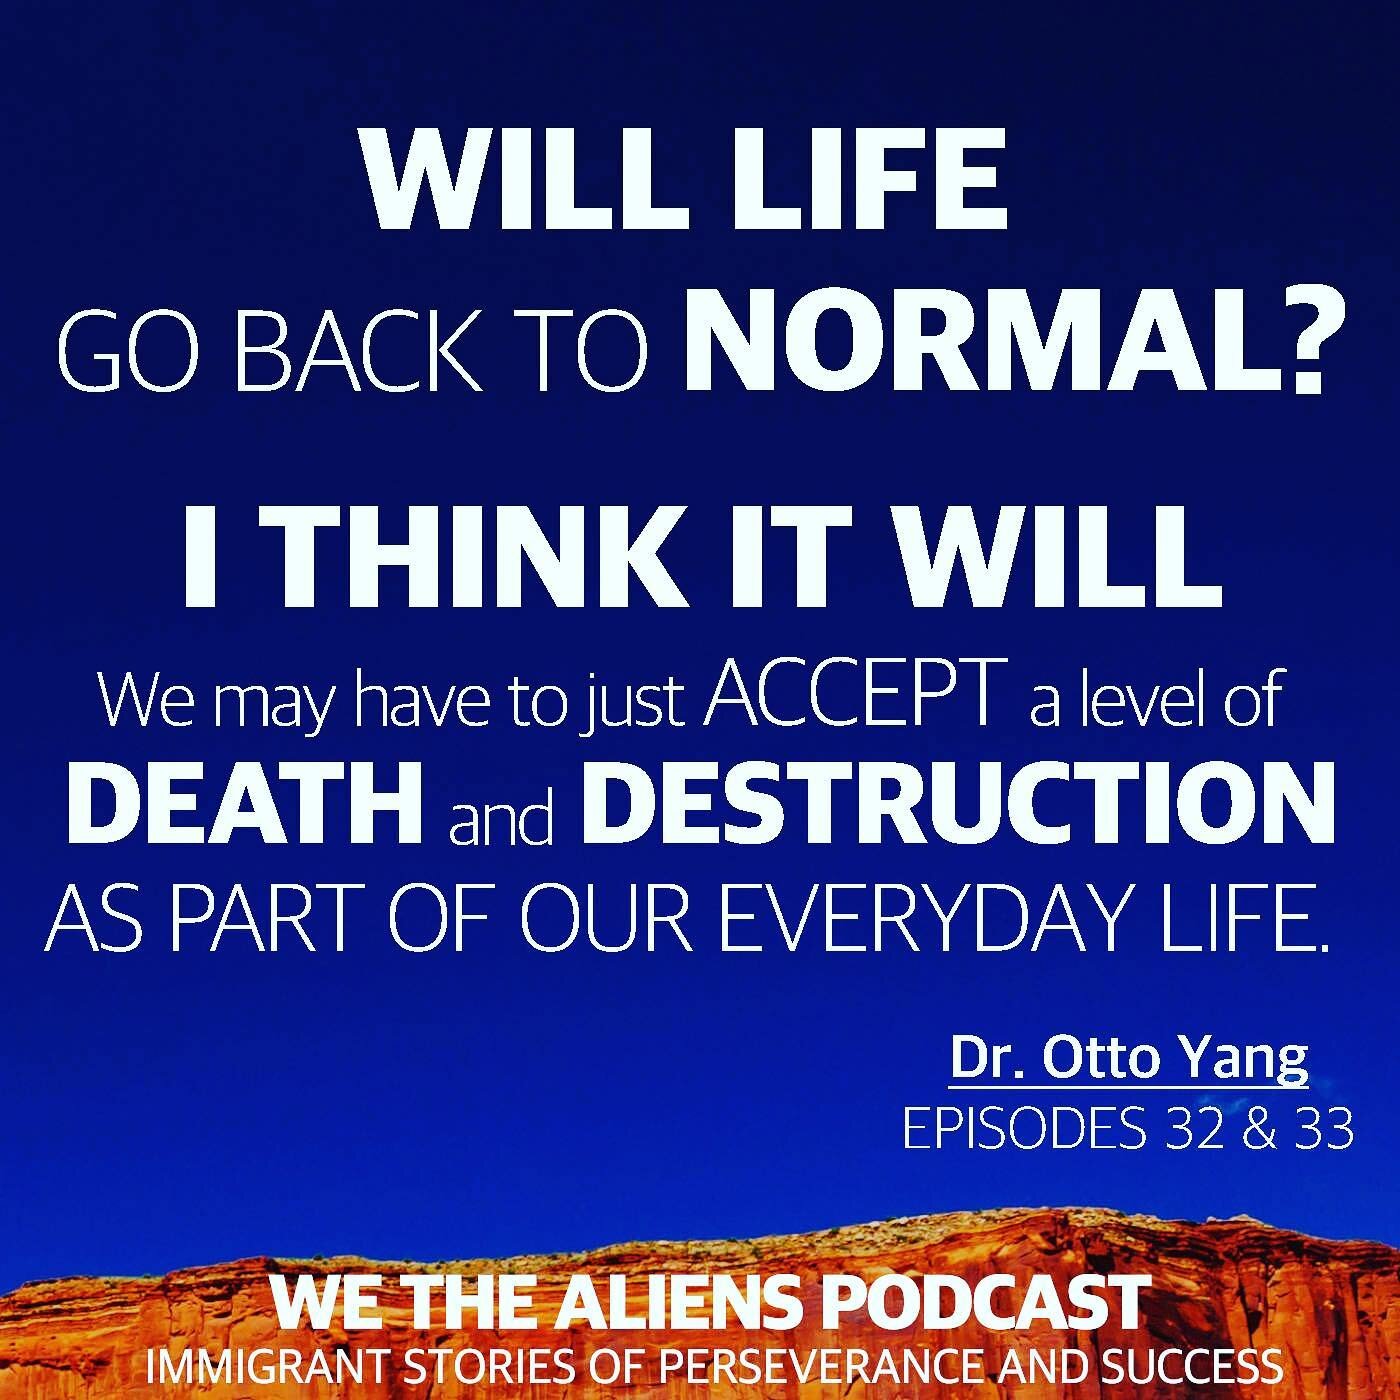 DOES THAT SOUND HOPEFUL ENOUGH?
.
.
Talking COVID with DR. OTTO YANG - Associate Chief of Infectious Disease at UCLA.
.
.
👉linktree in the bio👈
🎙We The Aliens Podcast🎙
@wethealienspod!
.
.
.
#WeTheAliens
.
.
.
#covidkindness #vaccination #ucla #h